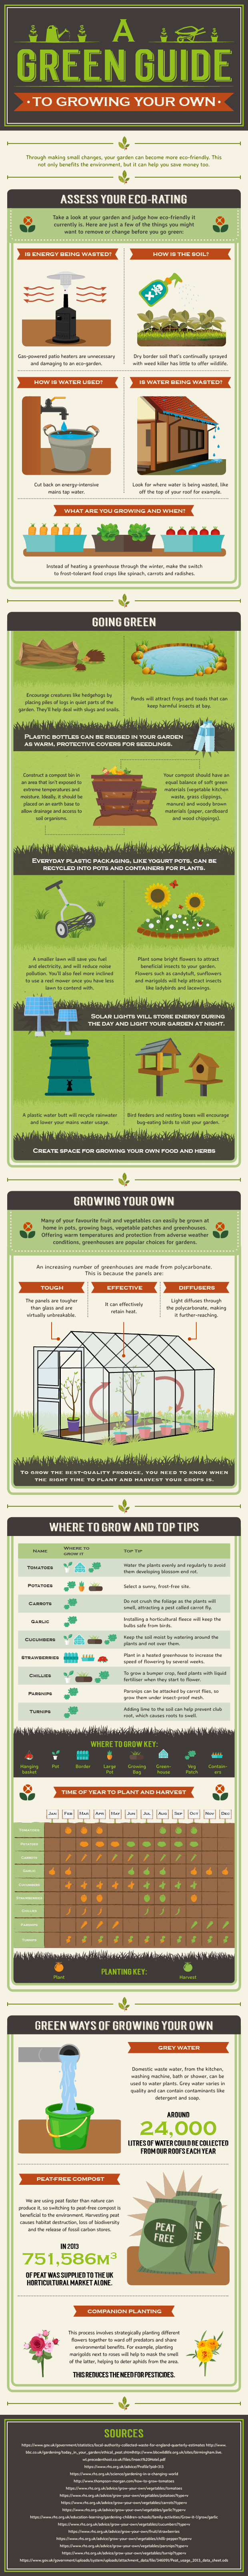 A green guide to growing